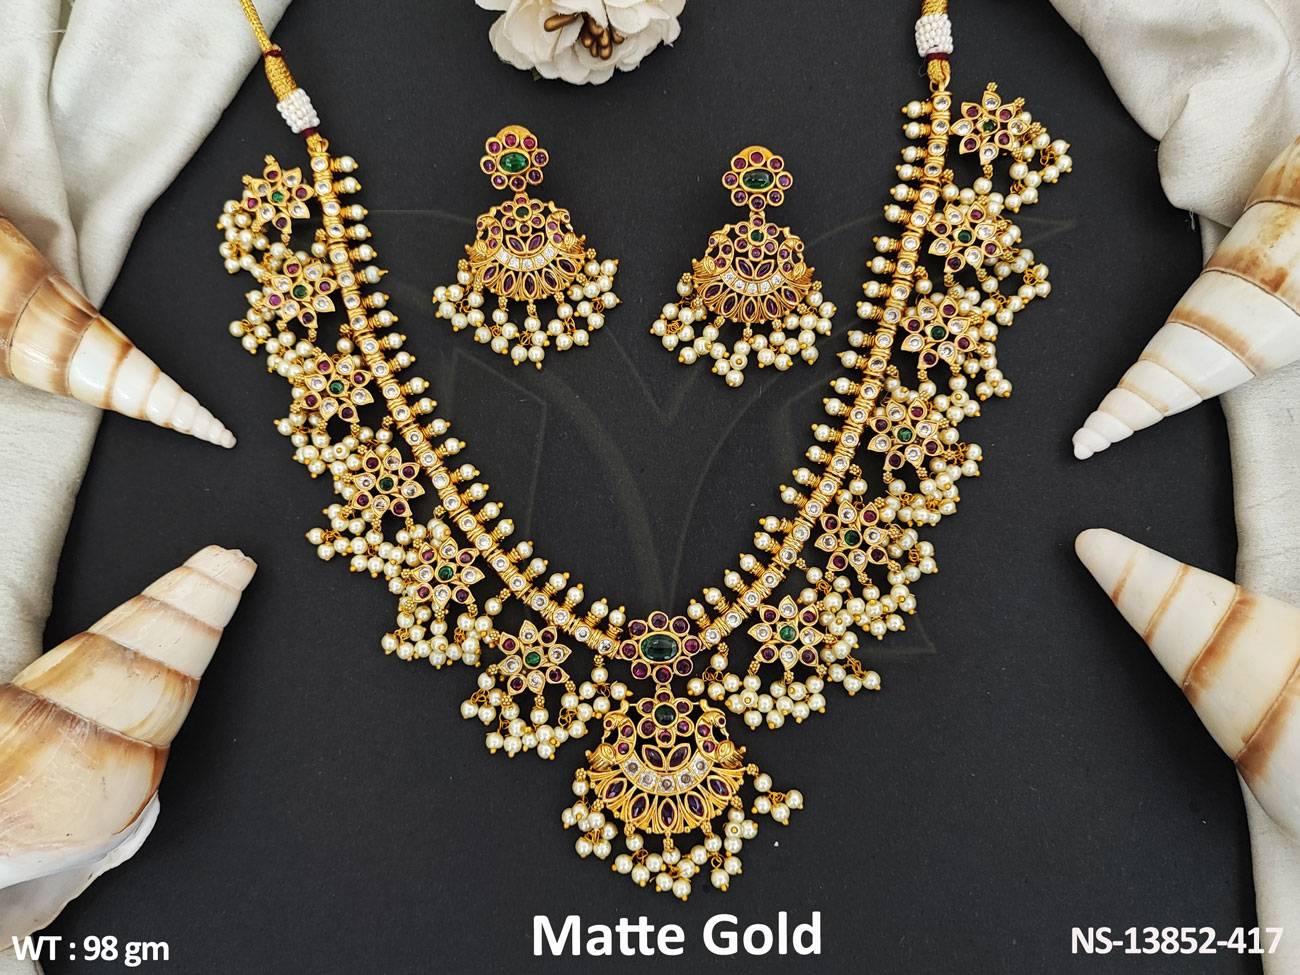 Beautiful necklace set is crafted with a matte gold polish finish and is adorned with a fancy cluster pearl design.